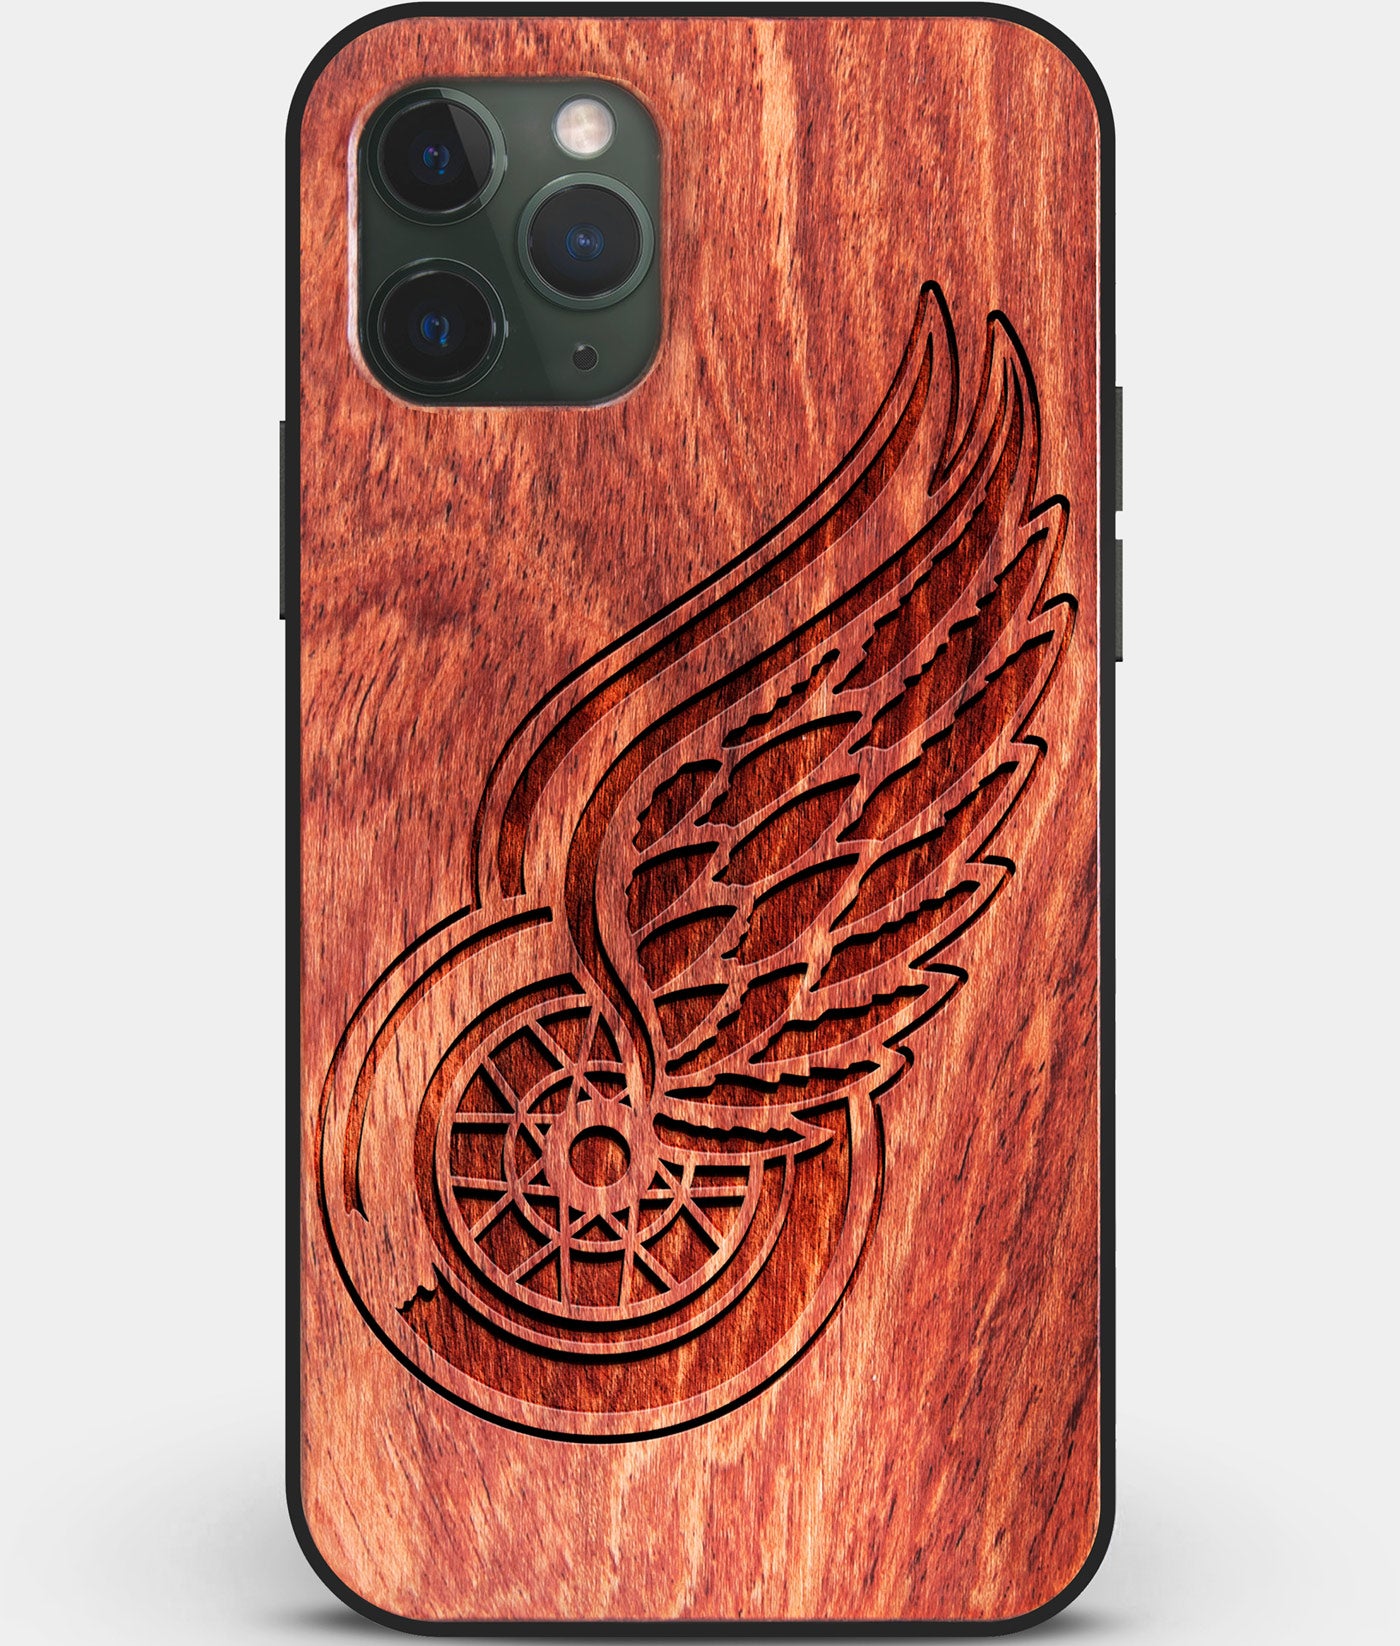 Custom Carved Wood Detroit Red Wings iPhone 11 Pro Max Case | Personalized Mahogany Wood Detroit Red Wings Cover, Birthday Gift, Gifts For Him, Monogrammed Gift For Fan | by Engraved In Nature